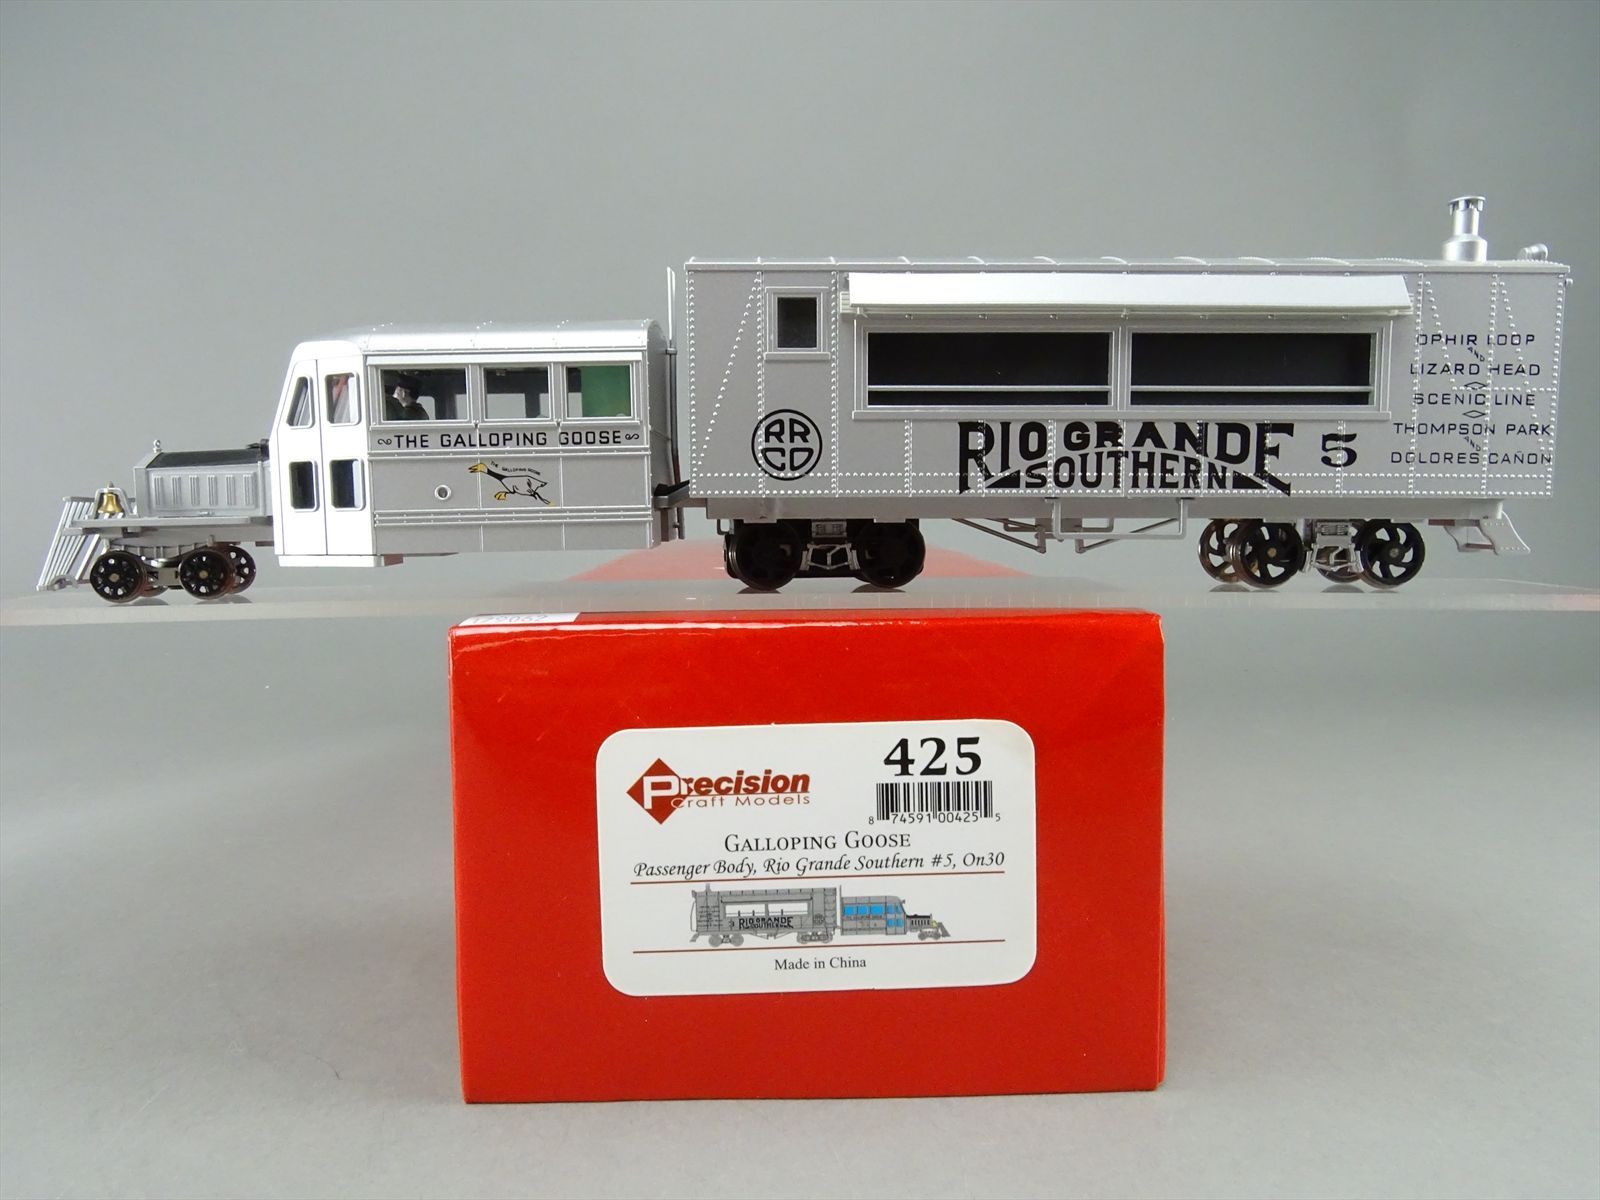 Precision Craft Models 425 HO Scale "RIO Grande Southern" Galloping Goose #5-Second hand-M1450